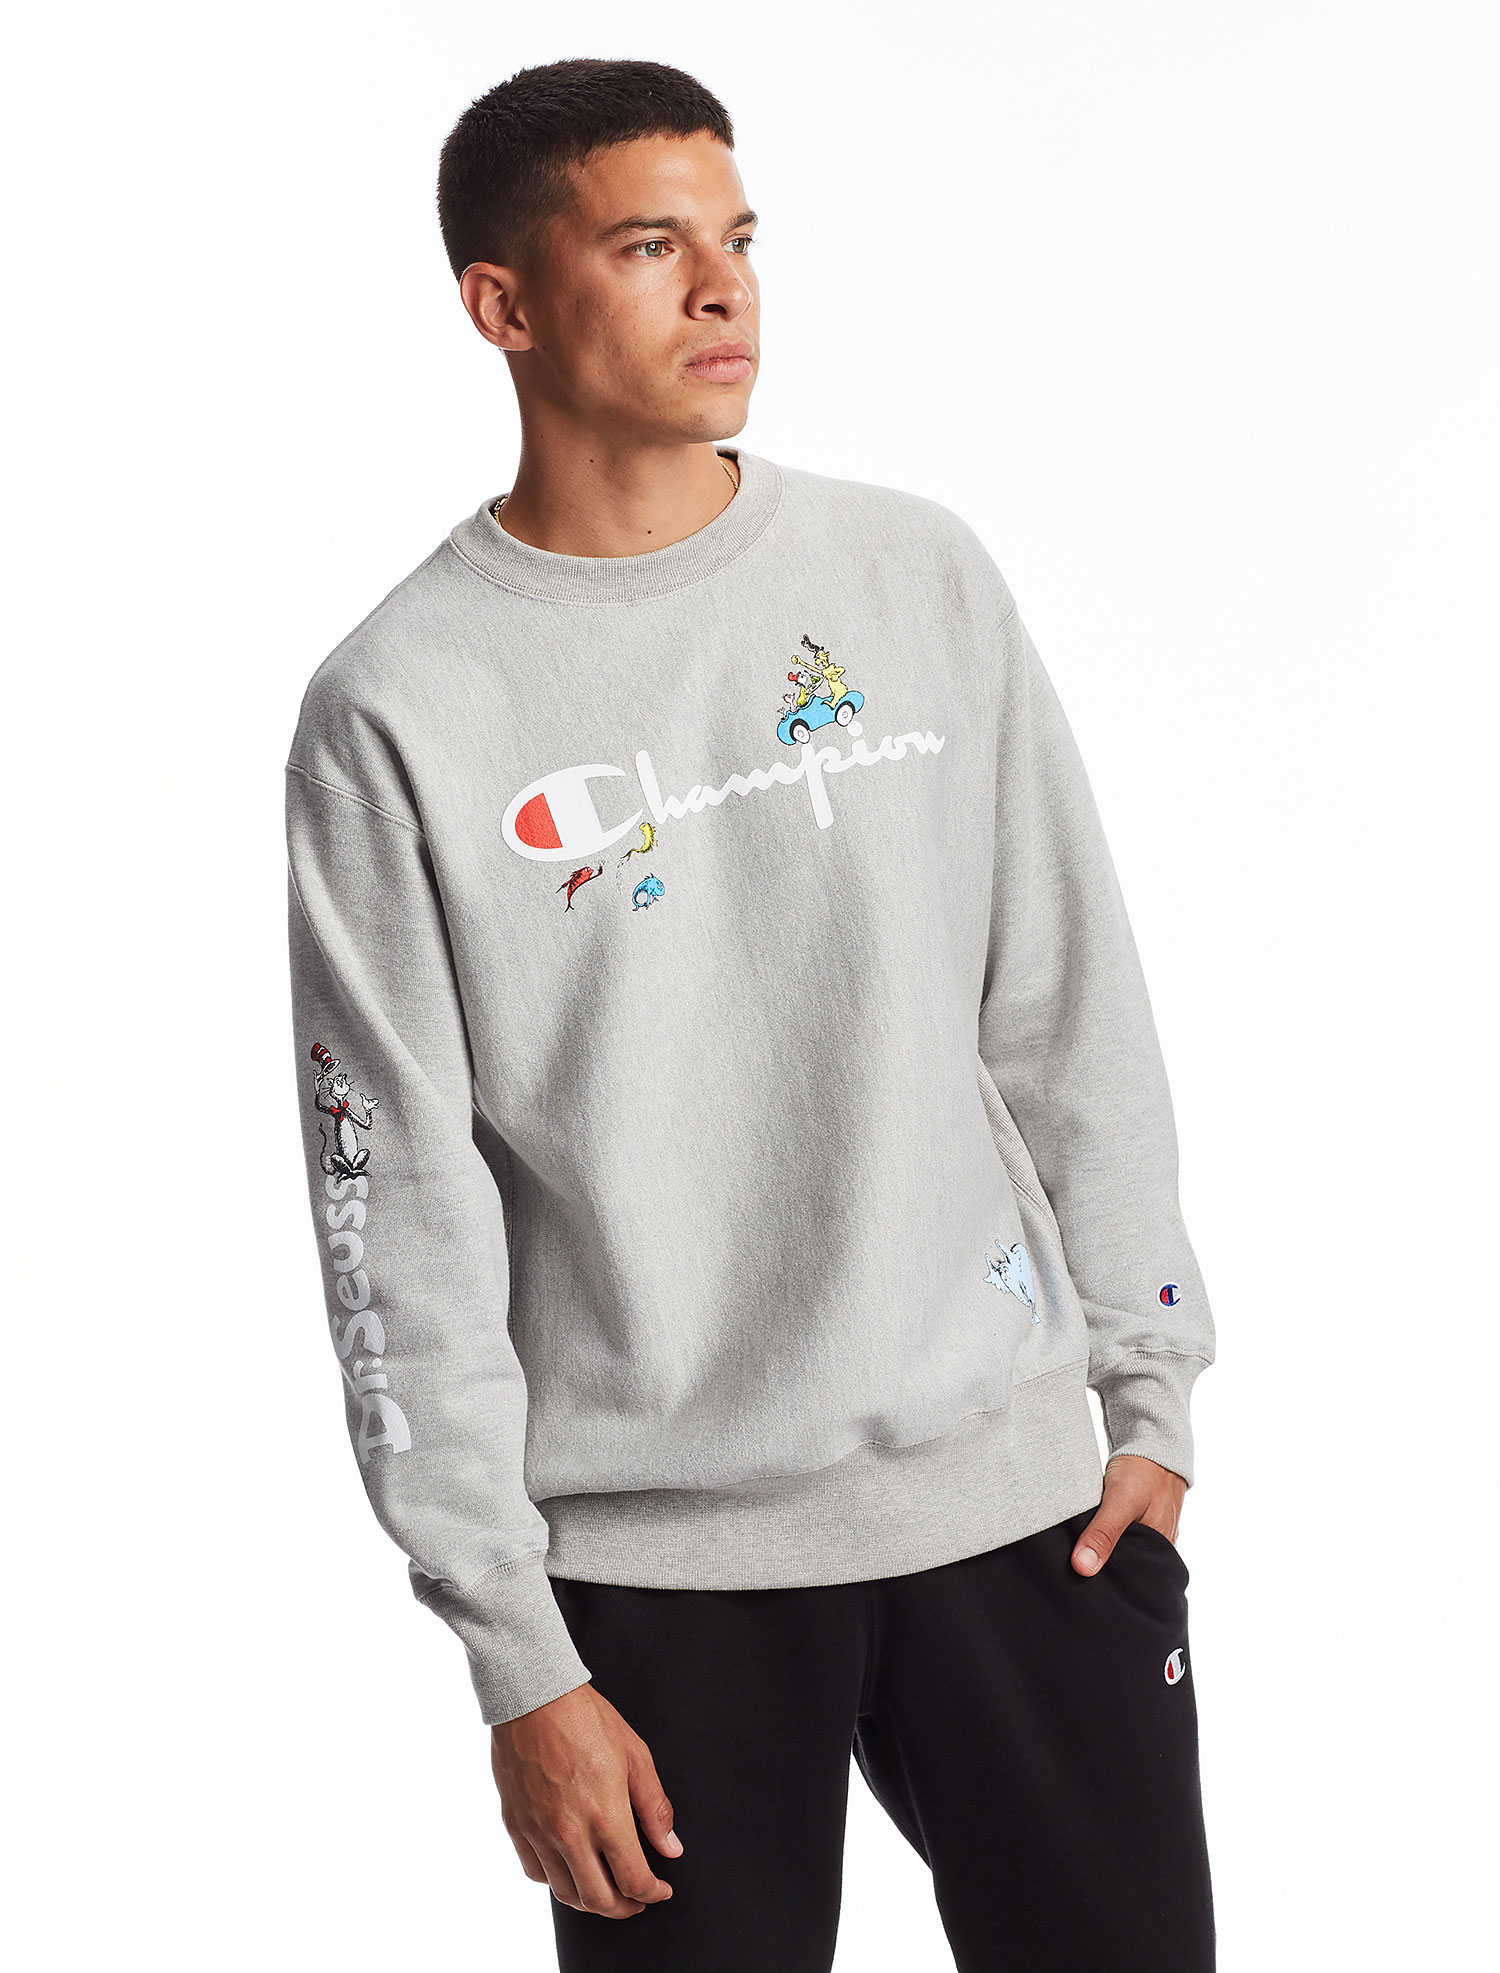 Champion Launches Limited-Edition Seuss Collection: Pics | vlr.eng.br